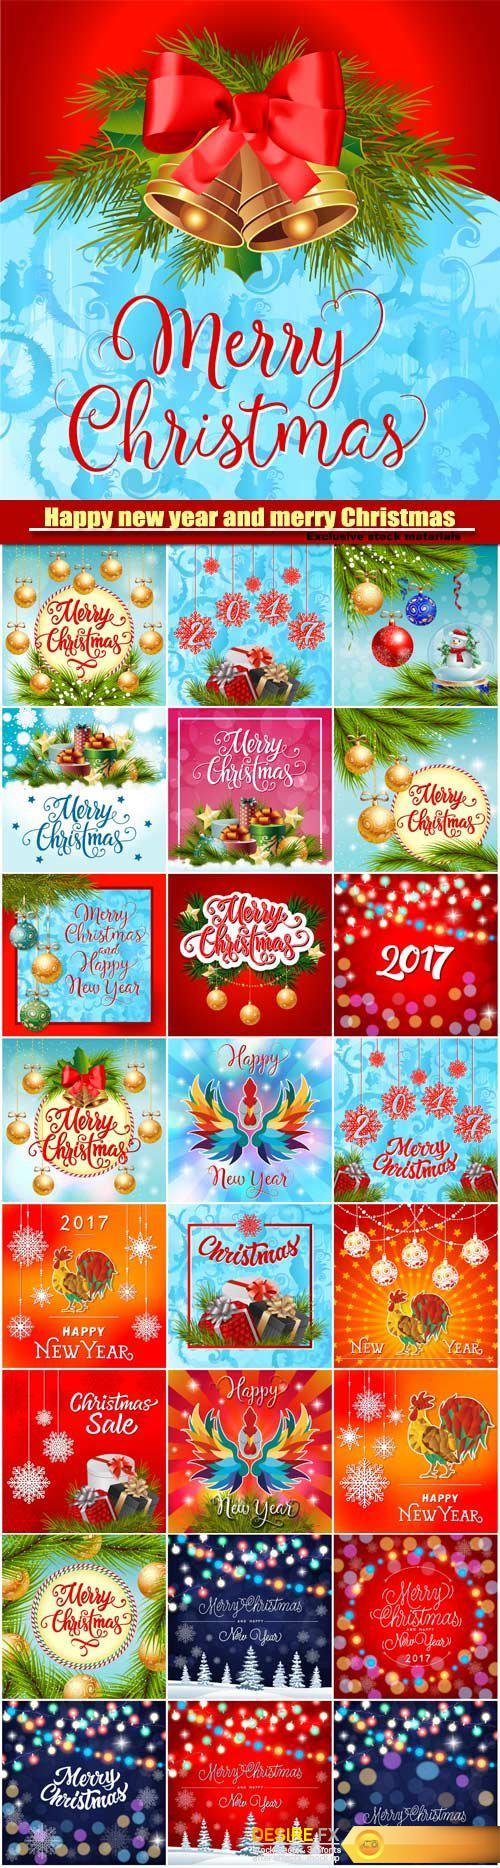 Merry Christmas and Happy New Year, decorations,Christmas balls, present boxes with bow, stars